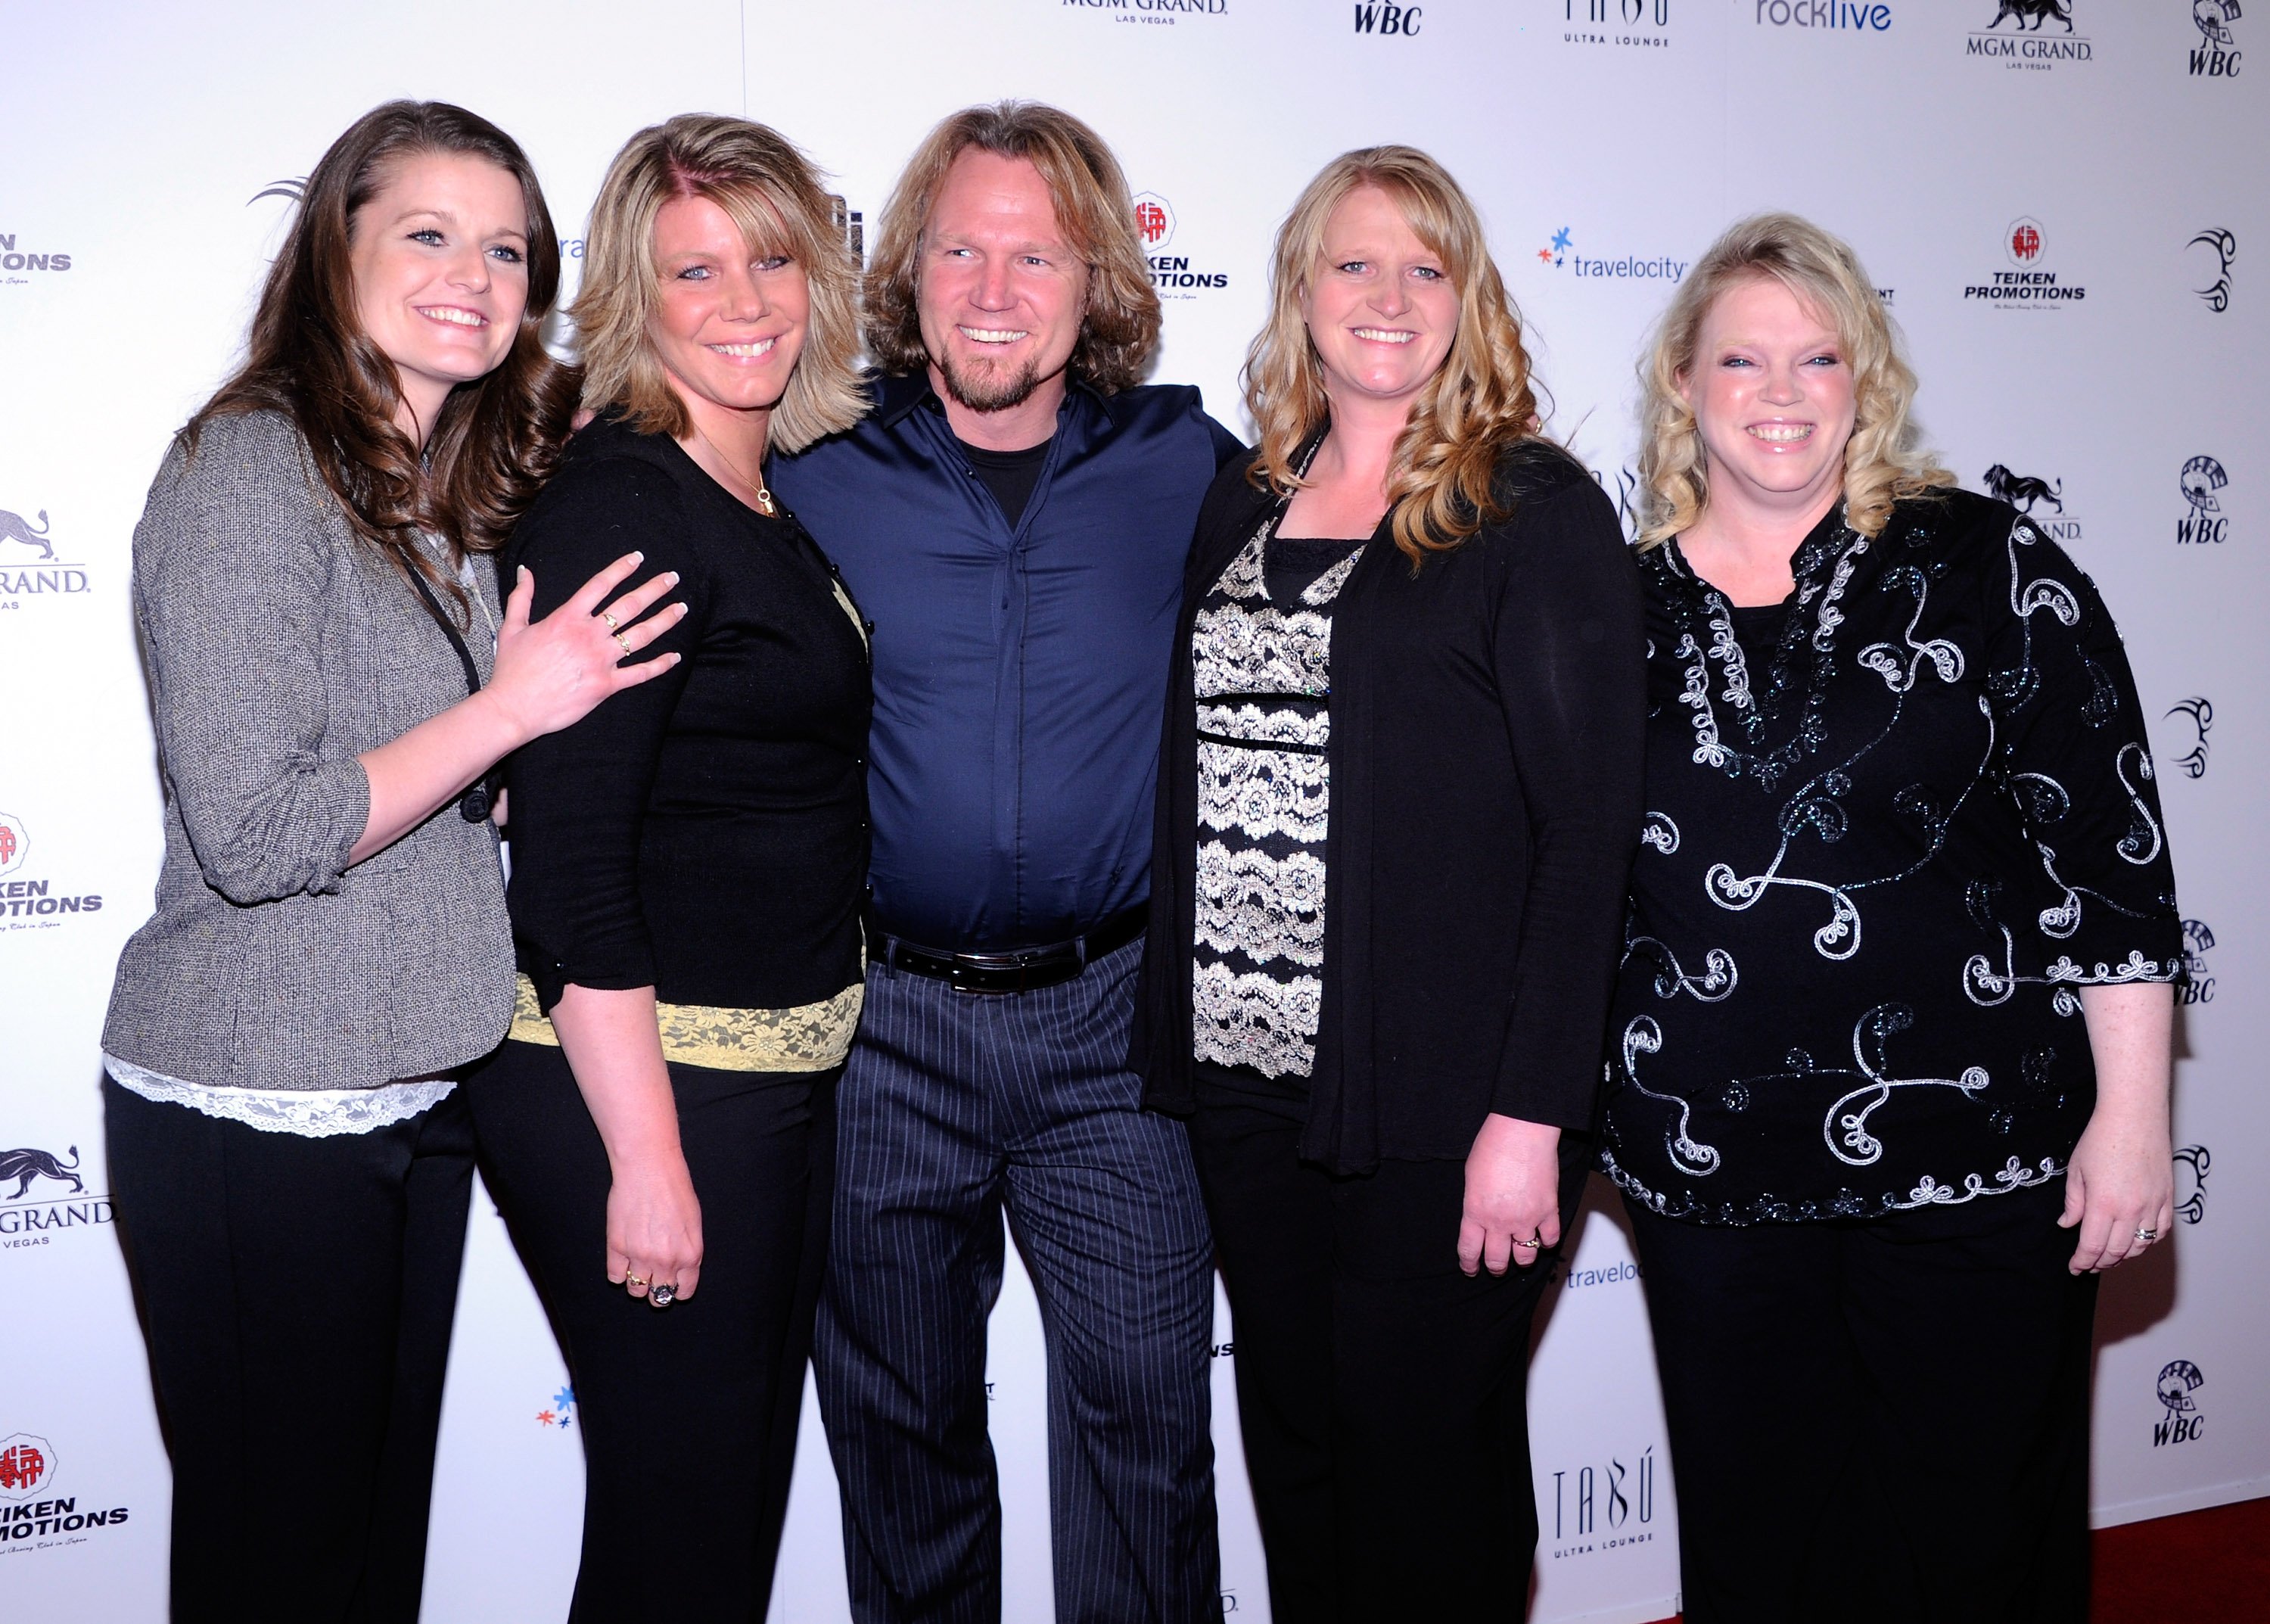 Robyn Brown, Meri Brown, Kody Brown, Christine Brown and Janelle Brown of 'Sister Wives' are photographed at the Hollywood Theatre